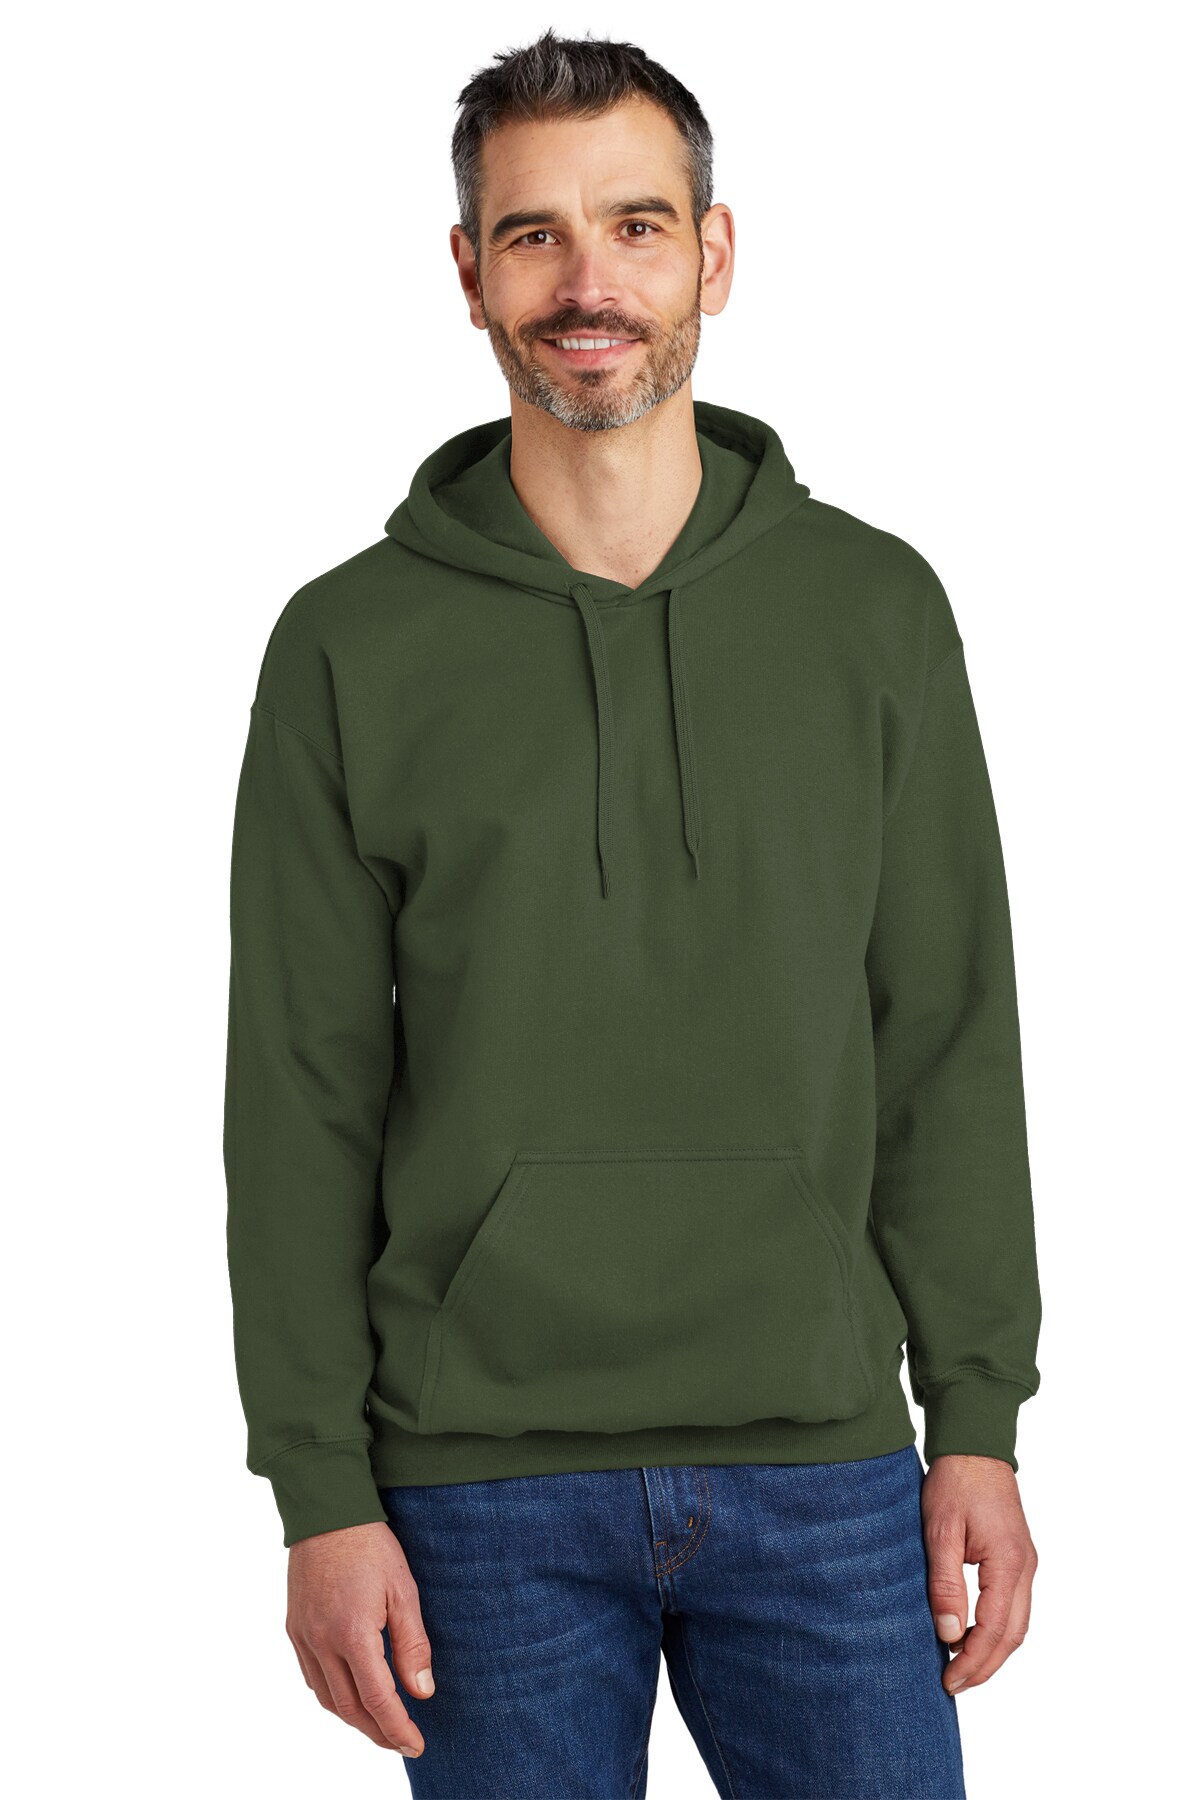 Pullover Hooded Sweatshirt and Trendy outerwear -Elevate Your Winter  Wardrobe with our Winter Chic Collection Cozy Apparel, Casual Wear, Warm  Hoodies